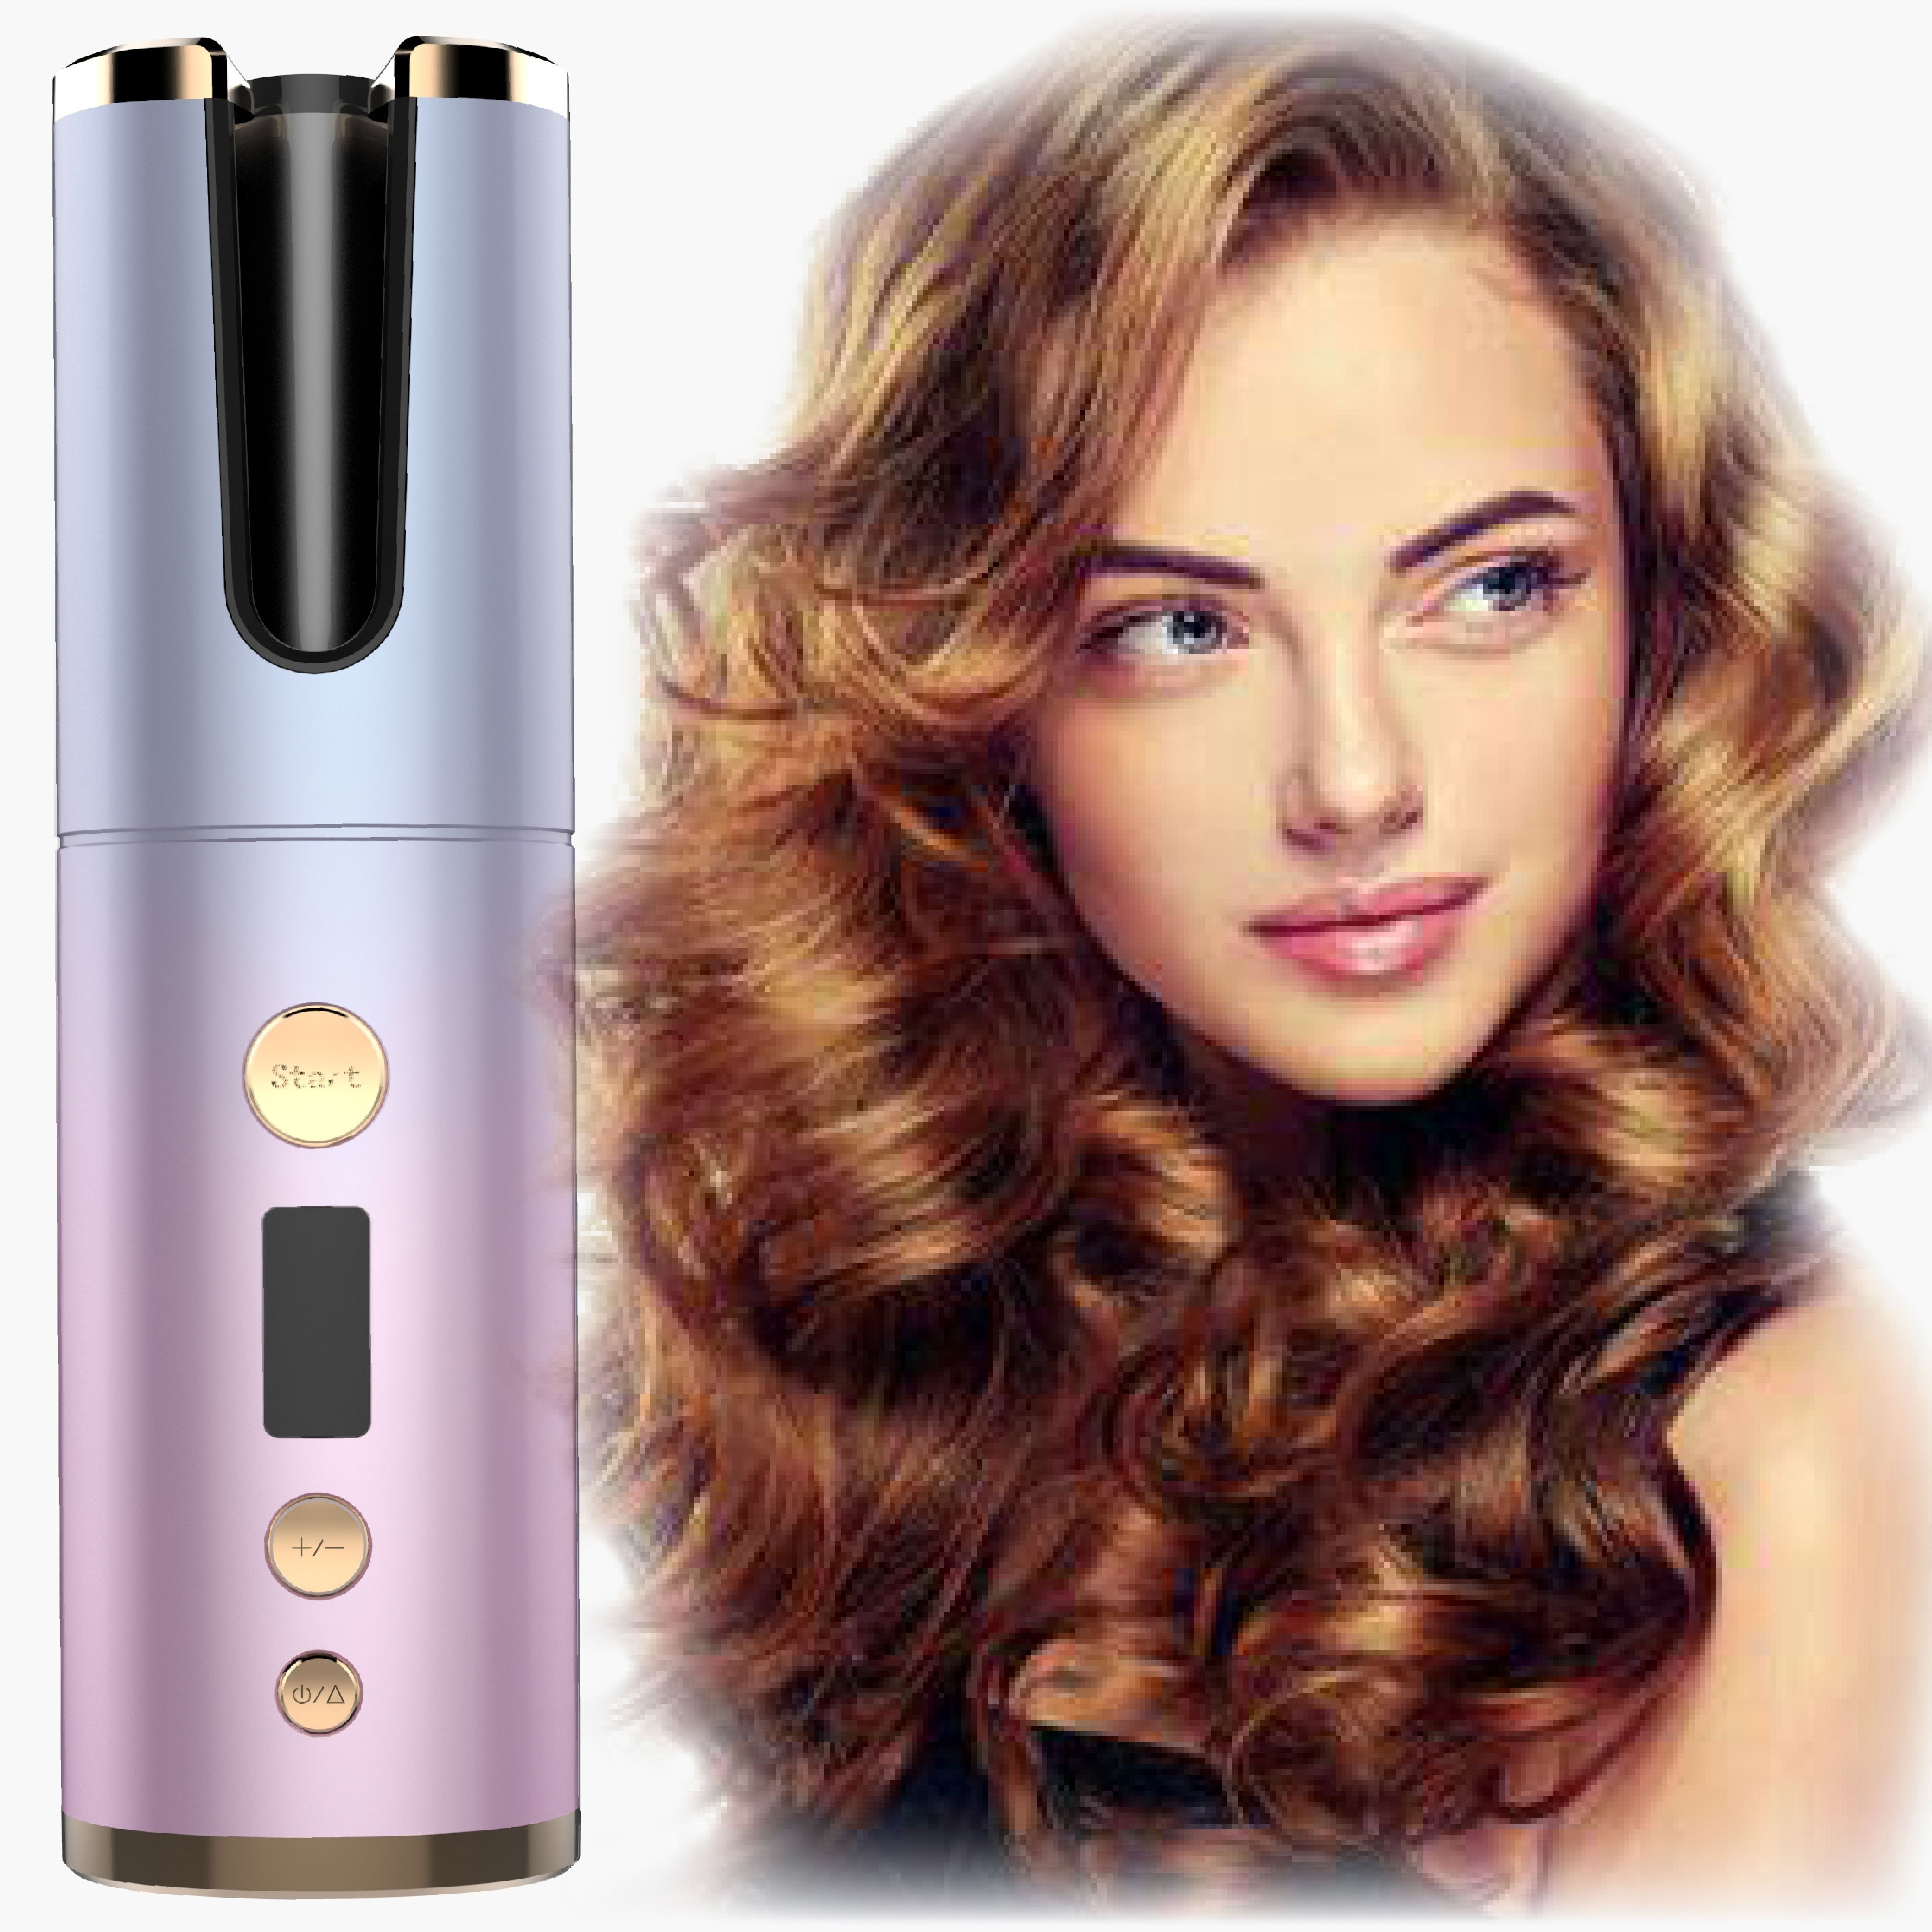 

Wireless Hair Curler, Rechargeable Portable Hair Curling Lron - Perfect For On-the-go Styling